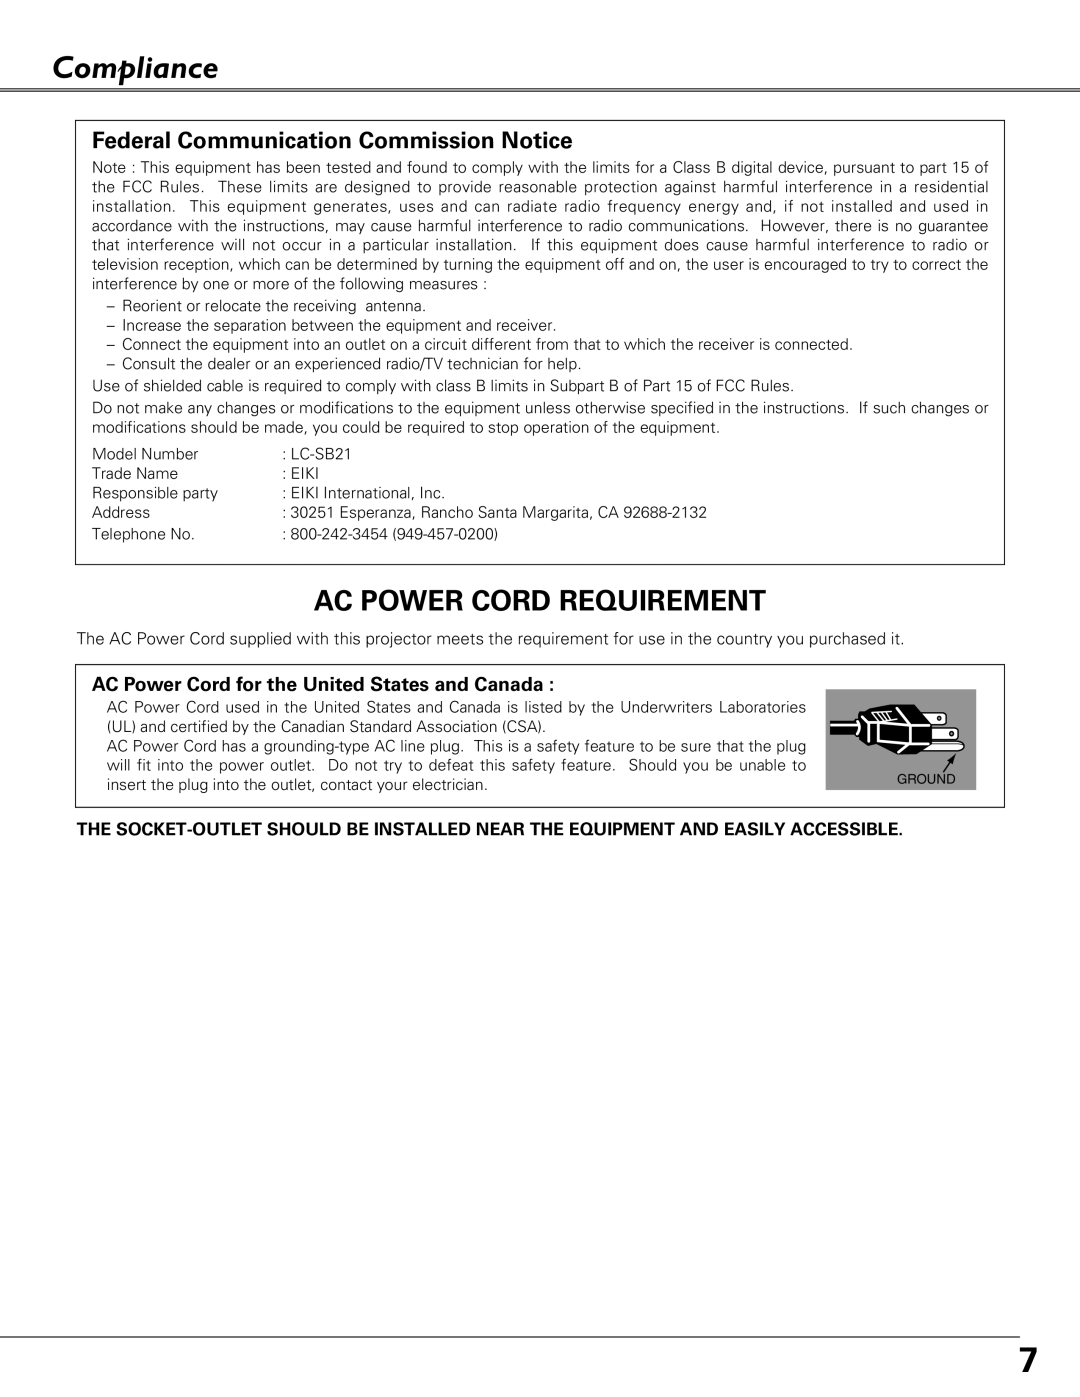 Eiki LC-SB21 owner manual Compliance, Ac Power Cord Requirement, Federal Communication Commission Notice 